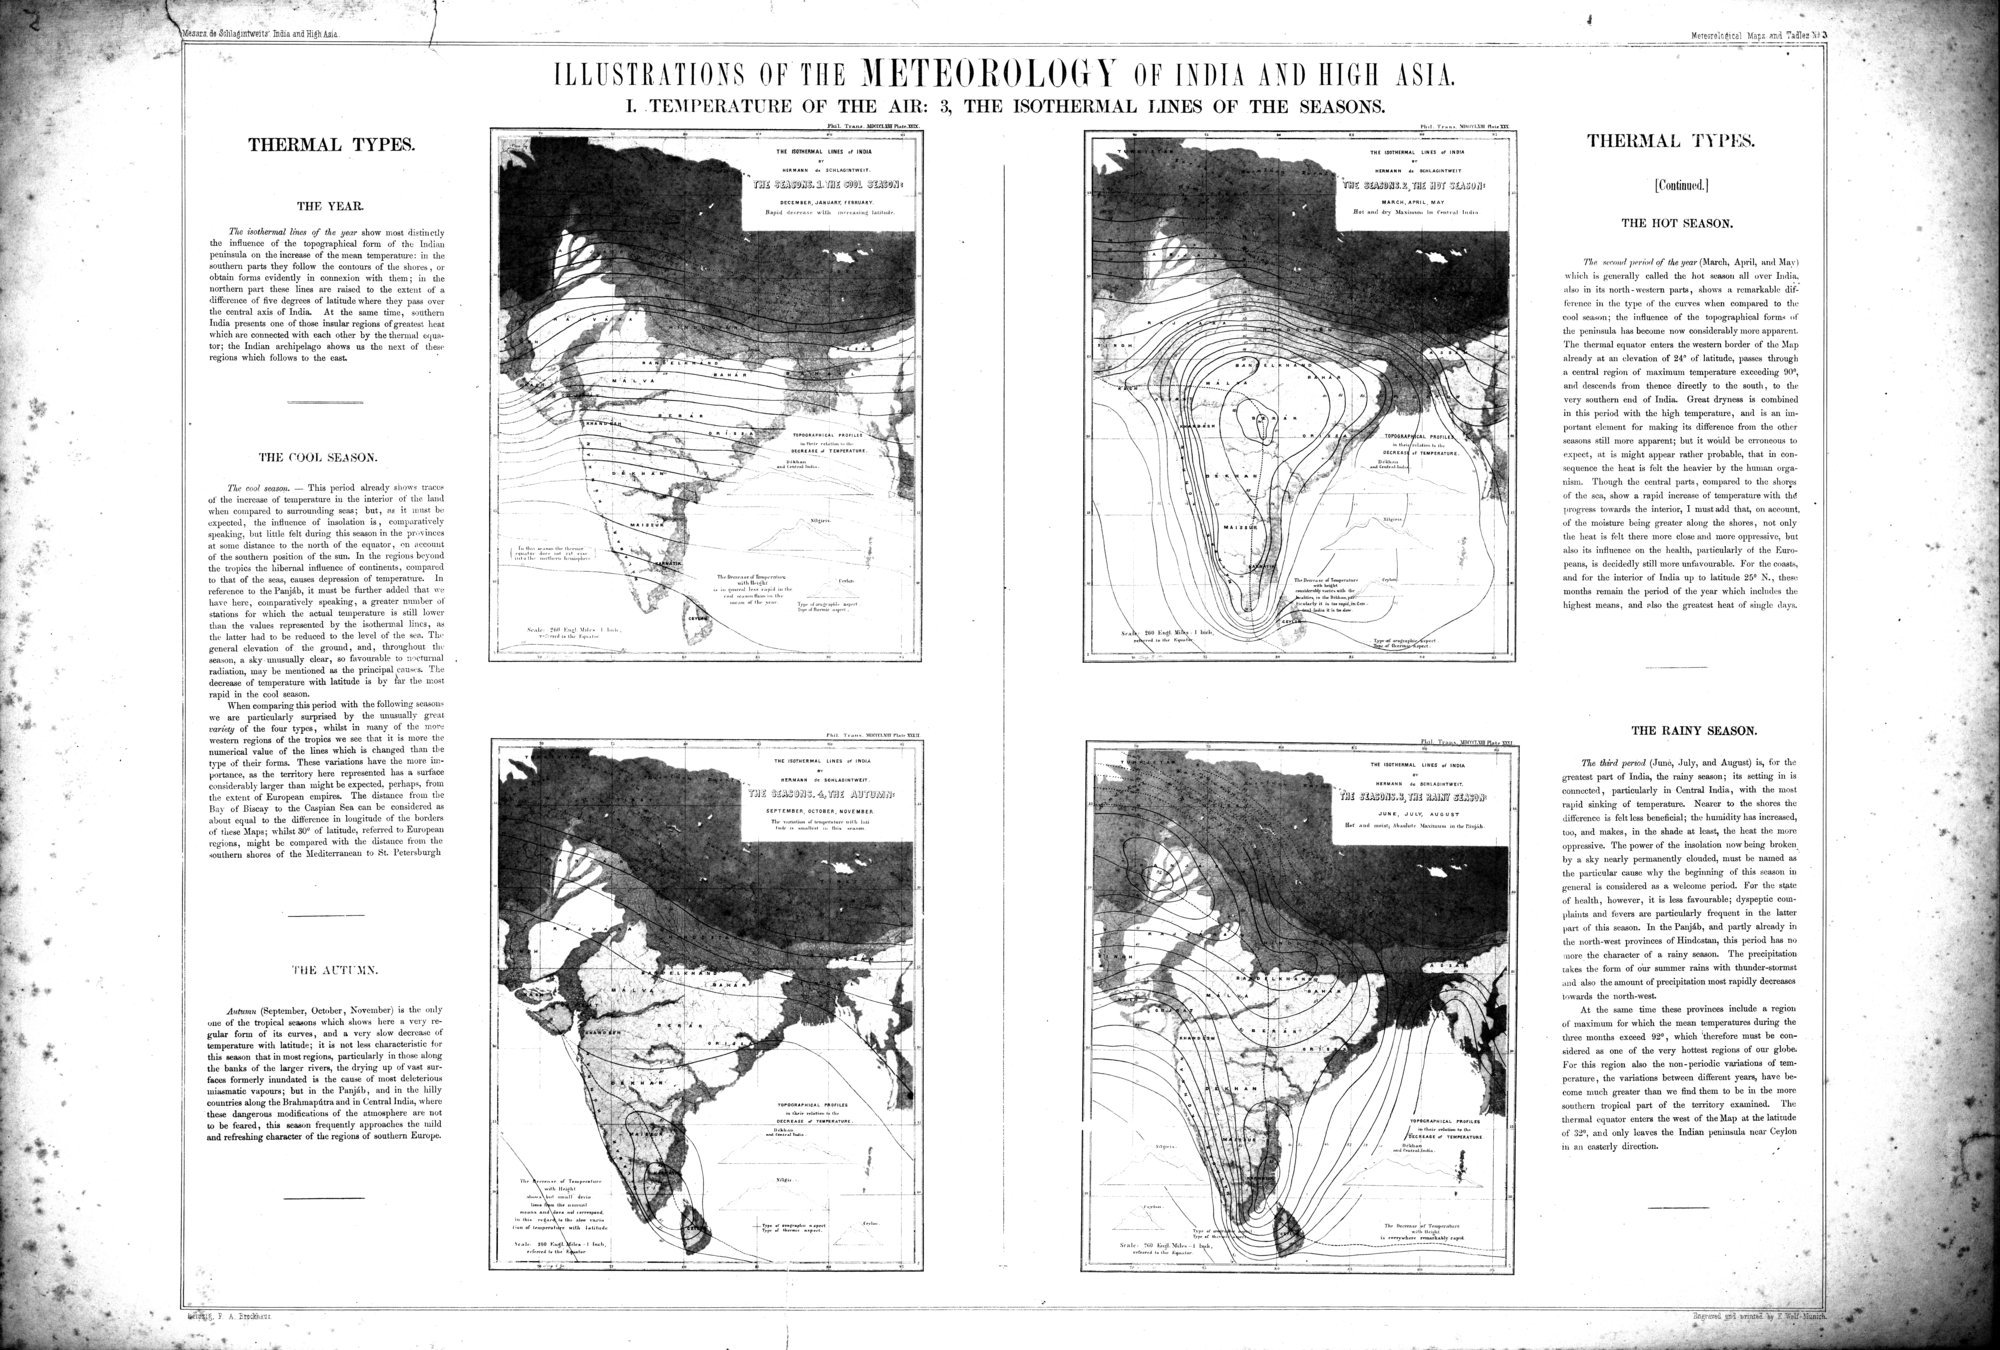 Results of a Scientific Mission to India and High Asia : vol.6 / Page 18 (Grayscale High Resolution Image)